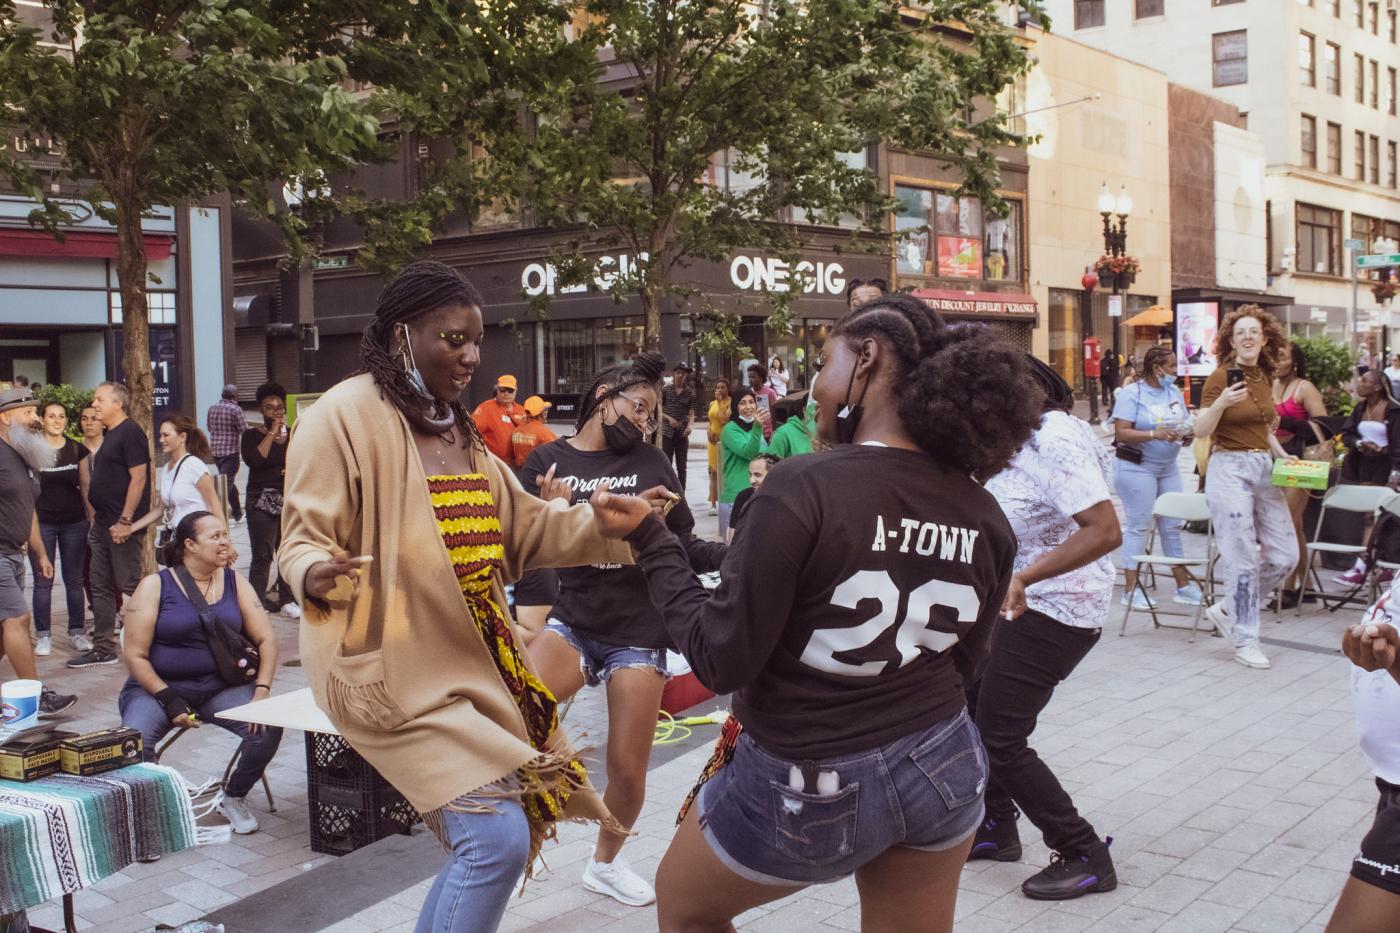 On a city street, four Black women dance together.